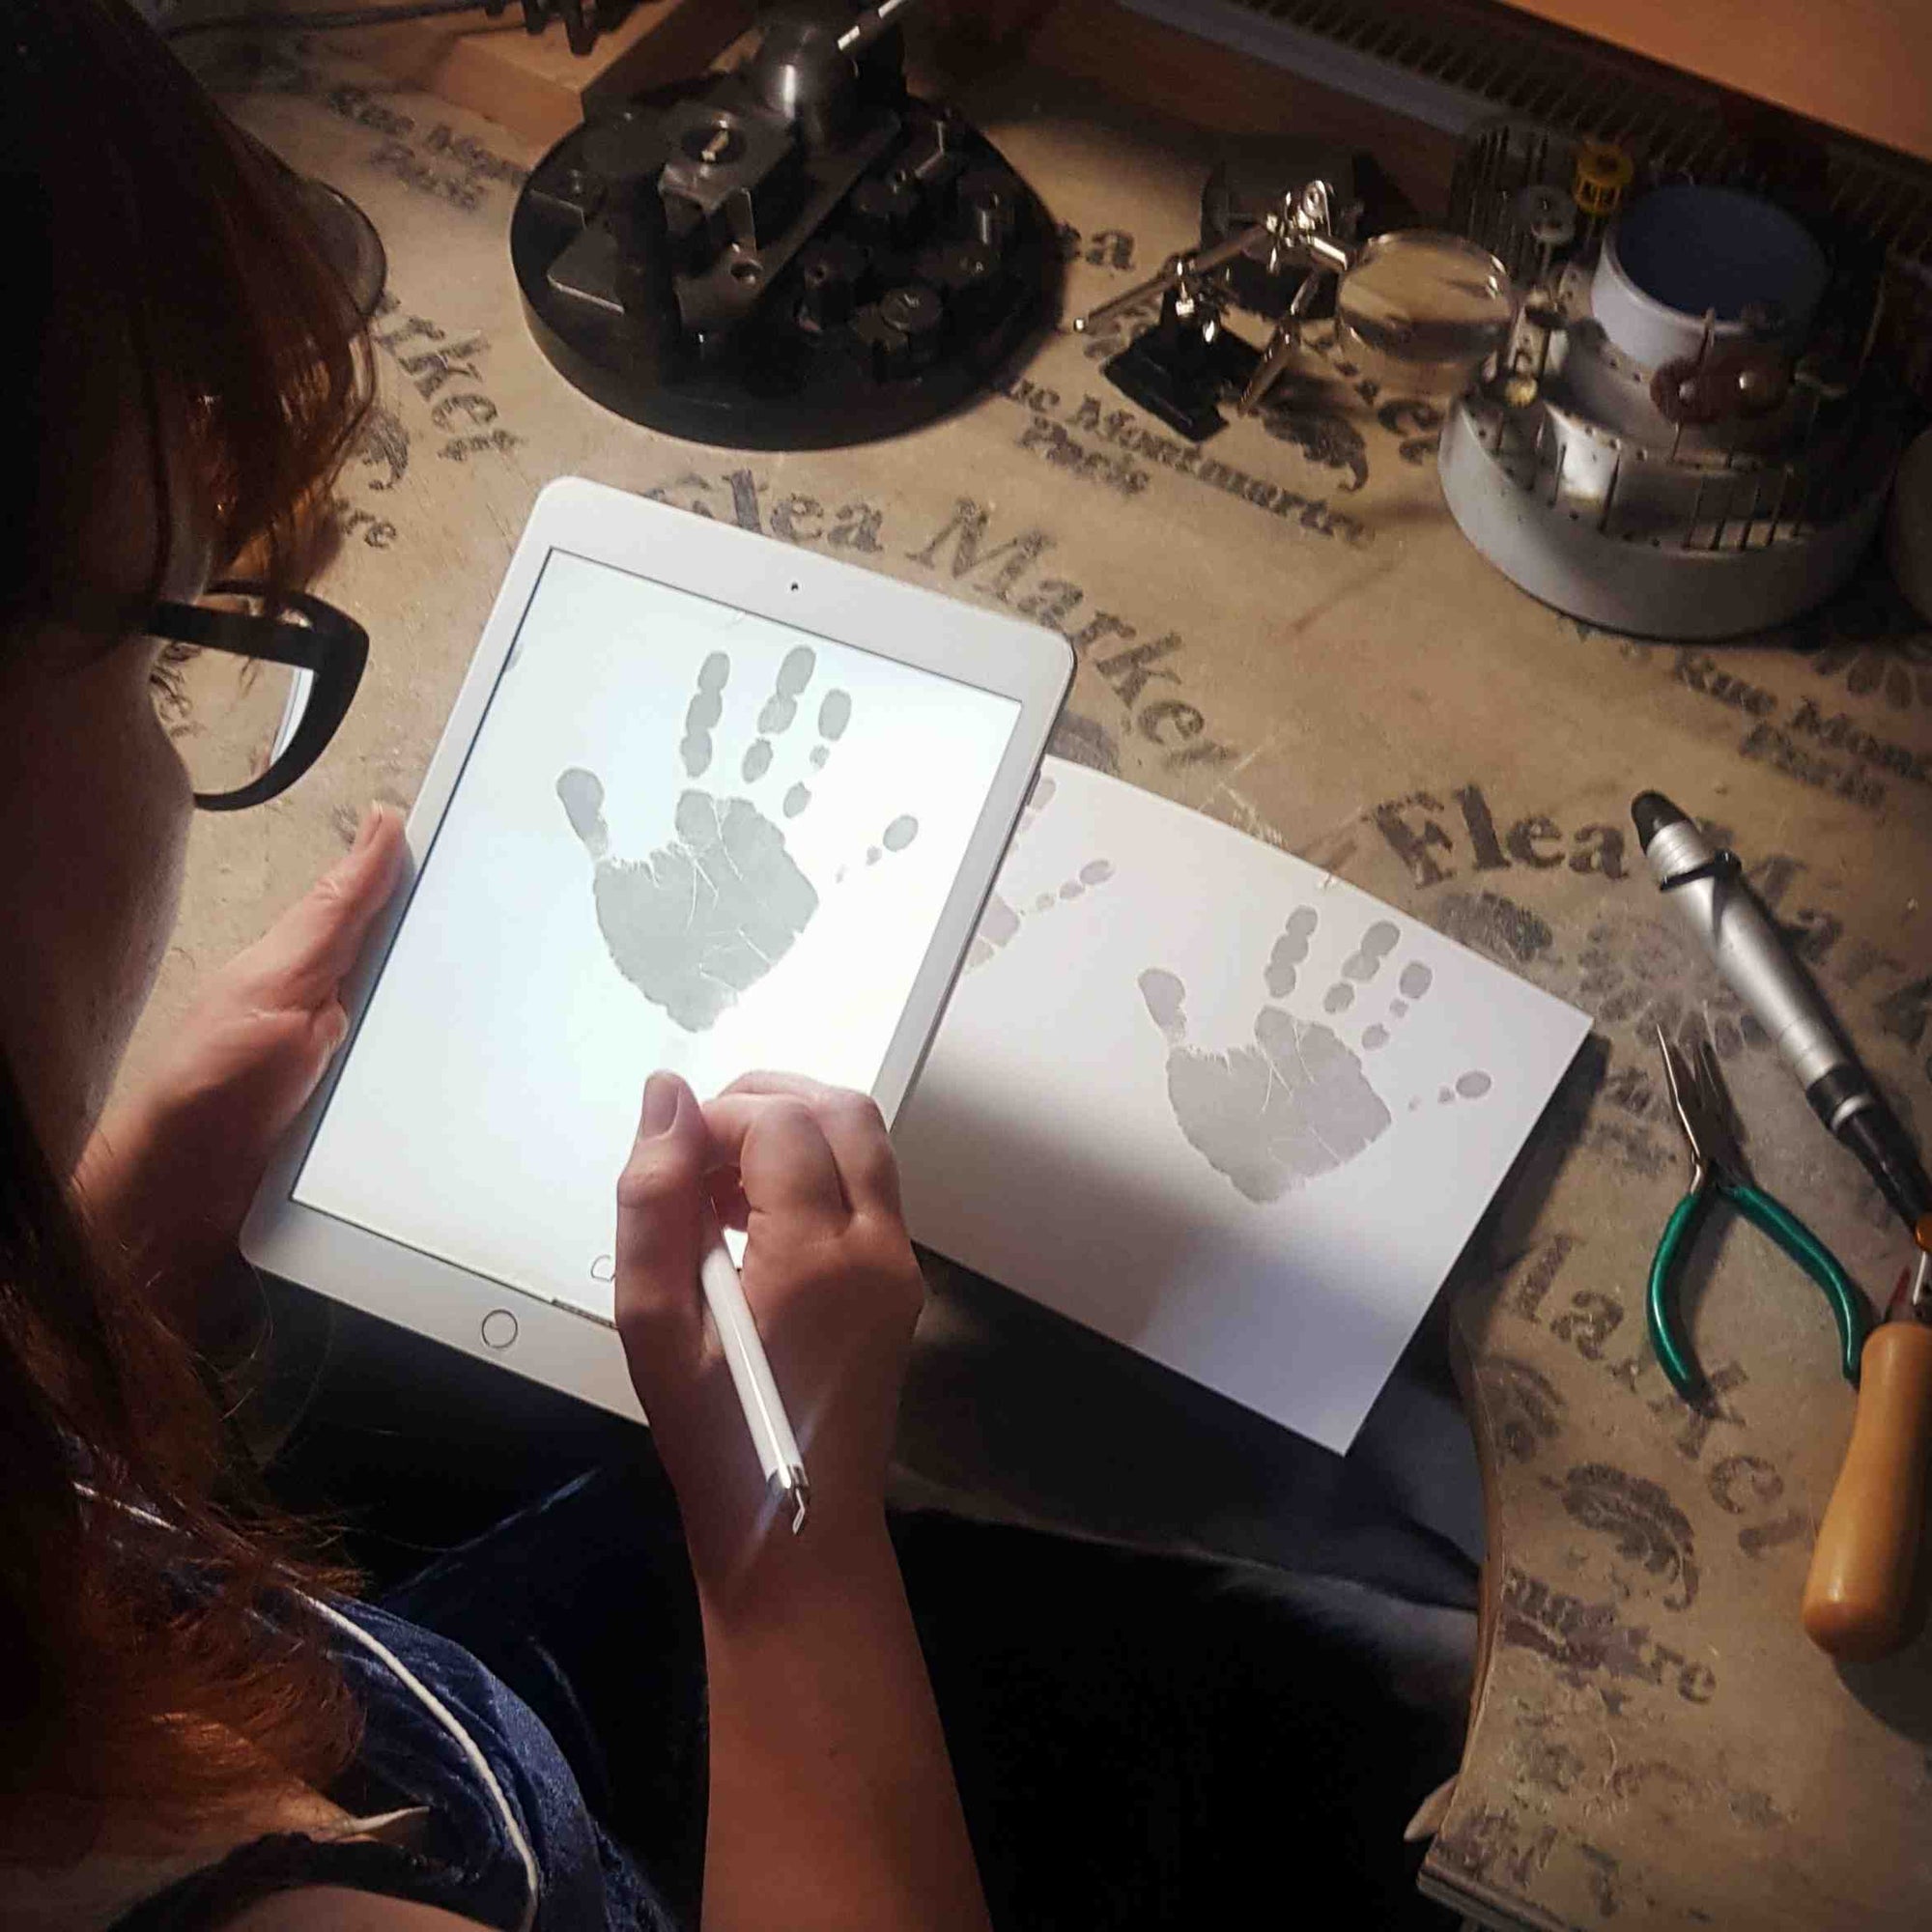 Lucille Whiting, owner at Sophia Alexander Jewellery sits at a jewellery bench with an Apple ipad.  The ipad screen shows a child's handprint.  She is editing it with an apple pencil.  On the bench are jewellery tools and a piece of paper showing the original handprint.